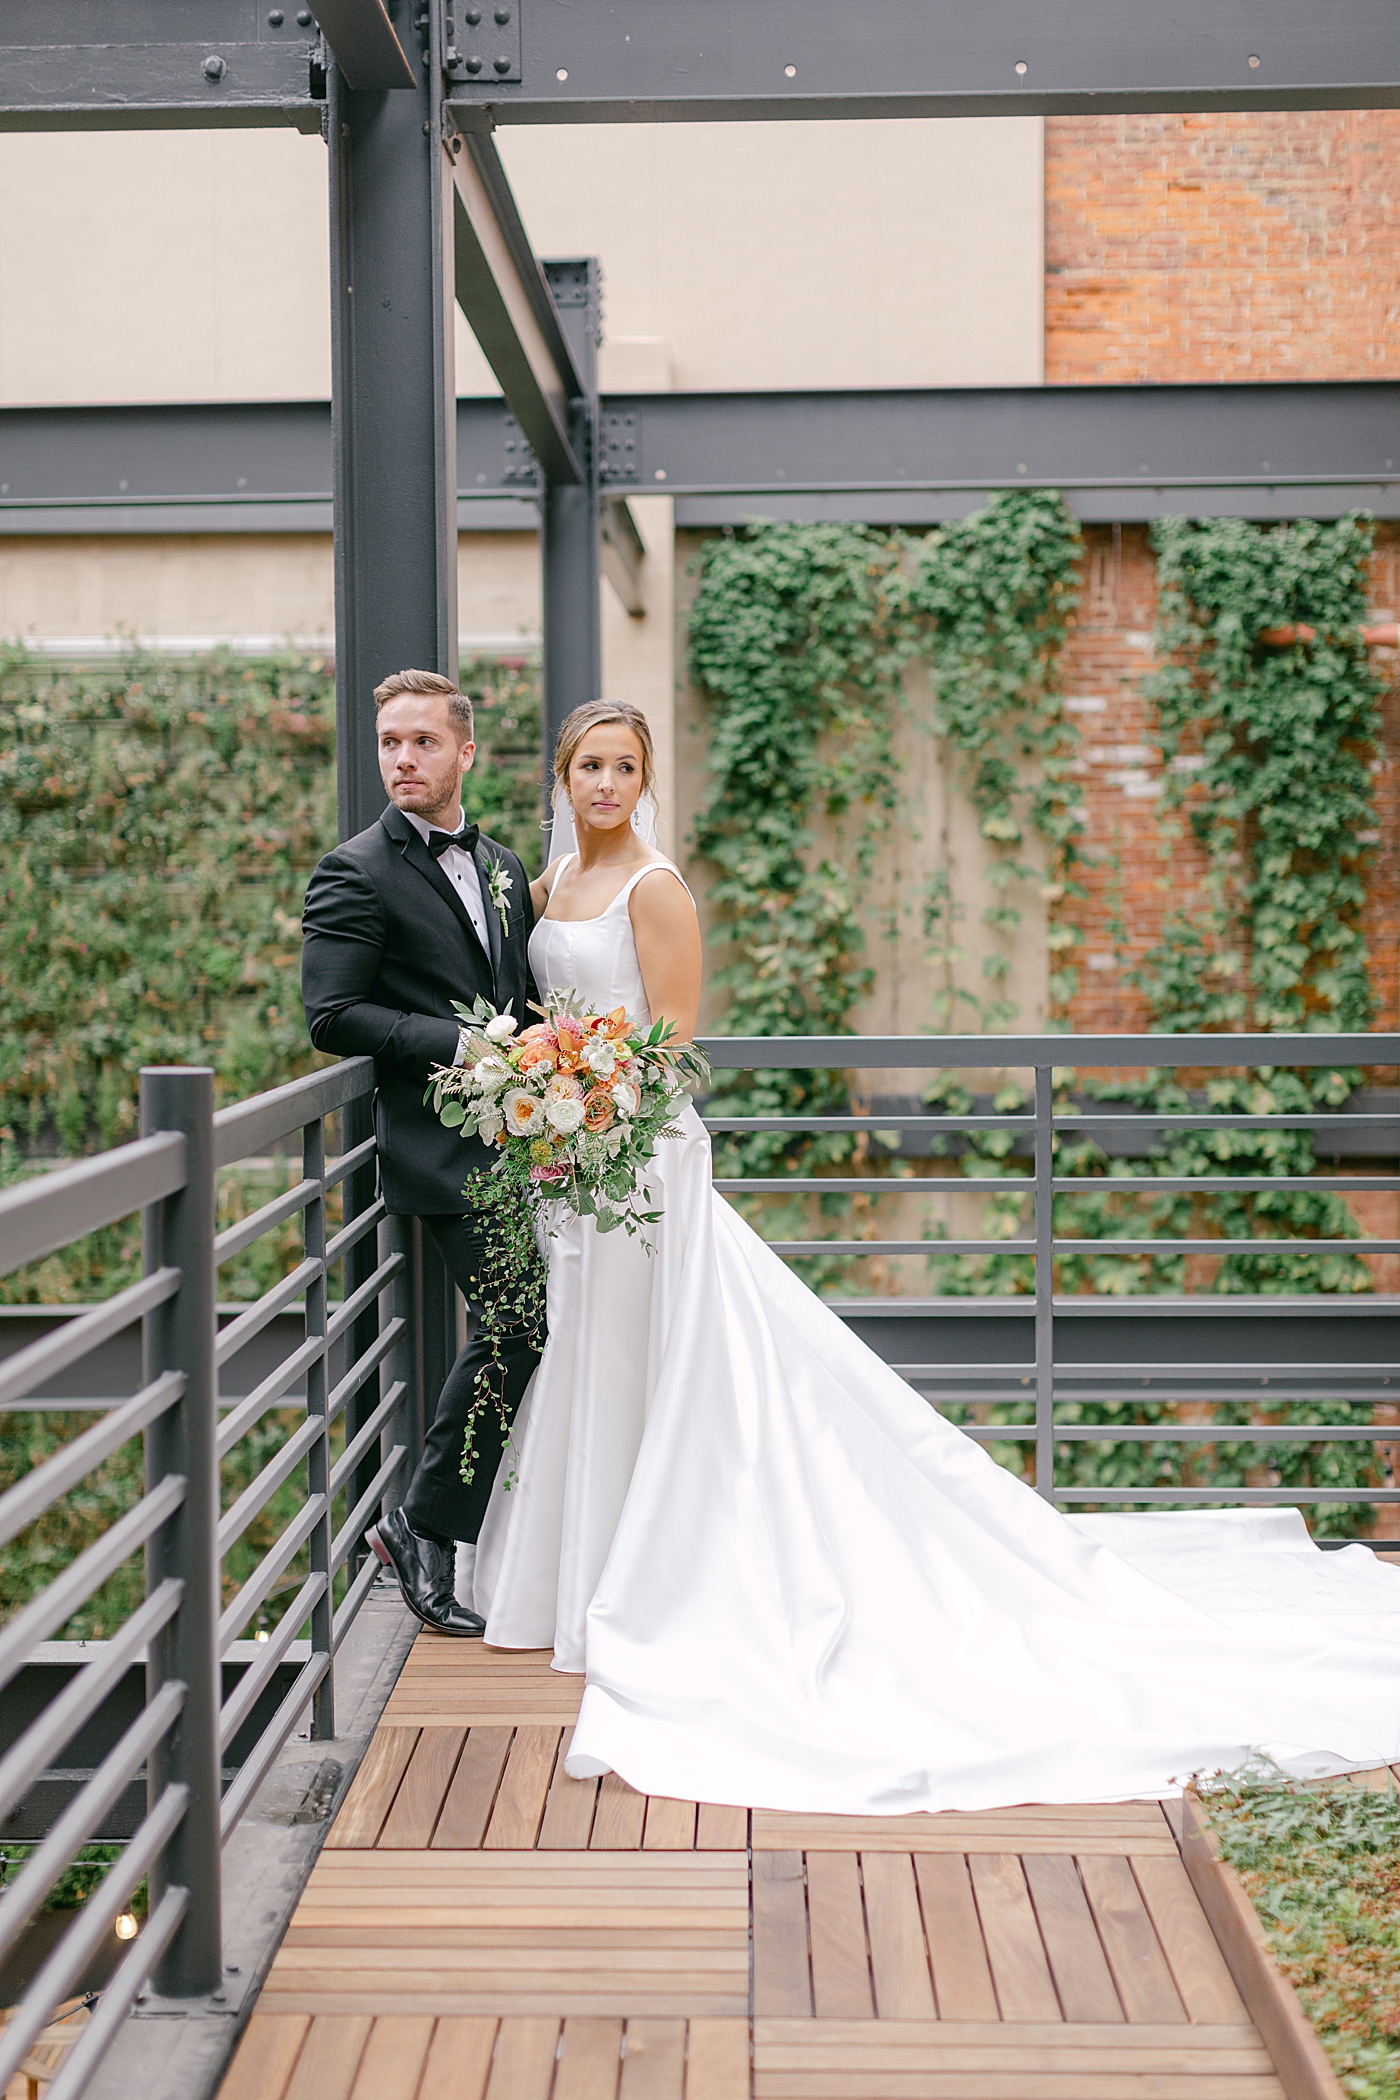 Bride and groom posing for portraits | Photo by Hope Helmuth Photography